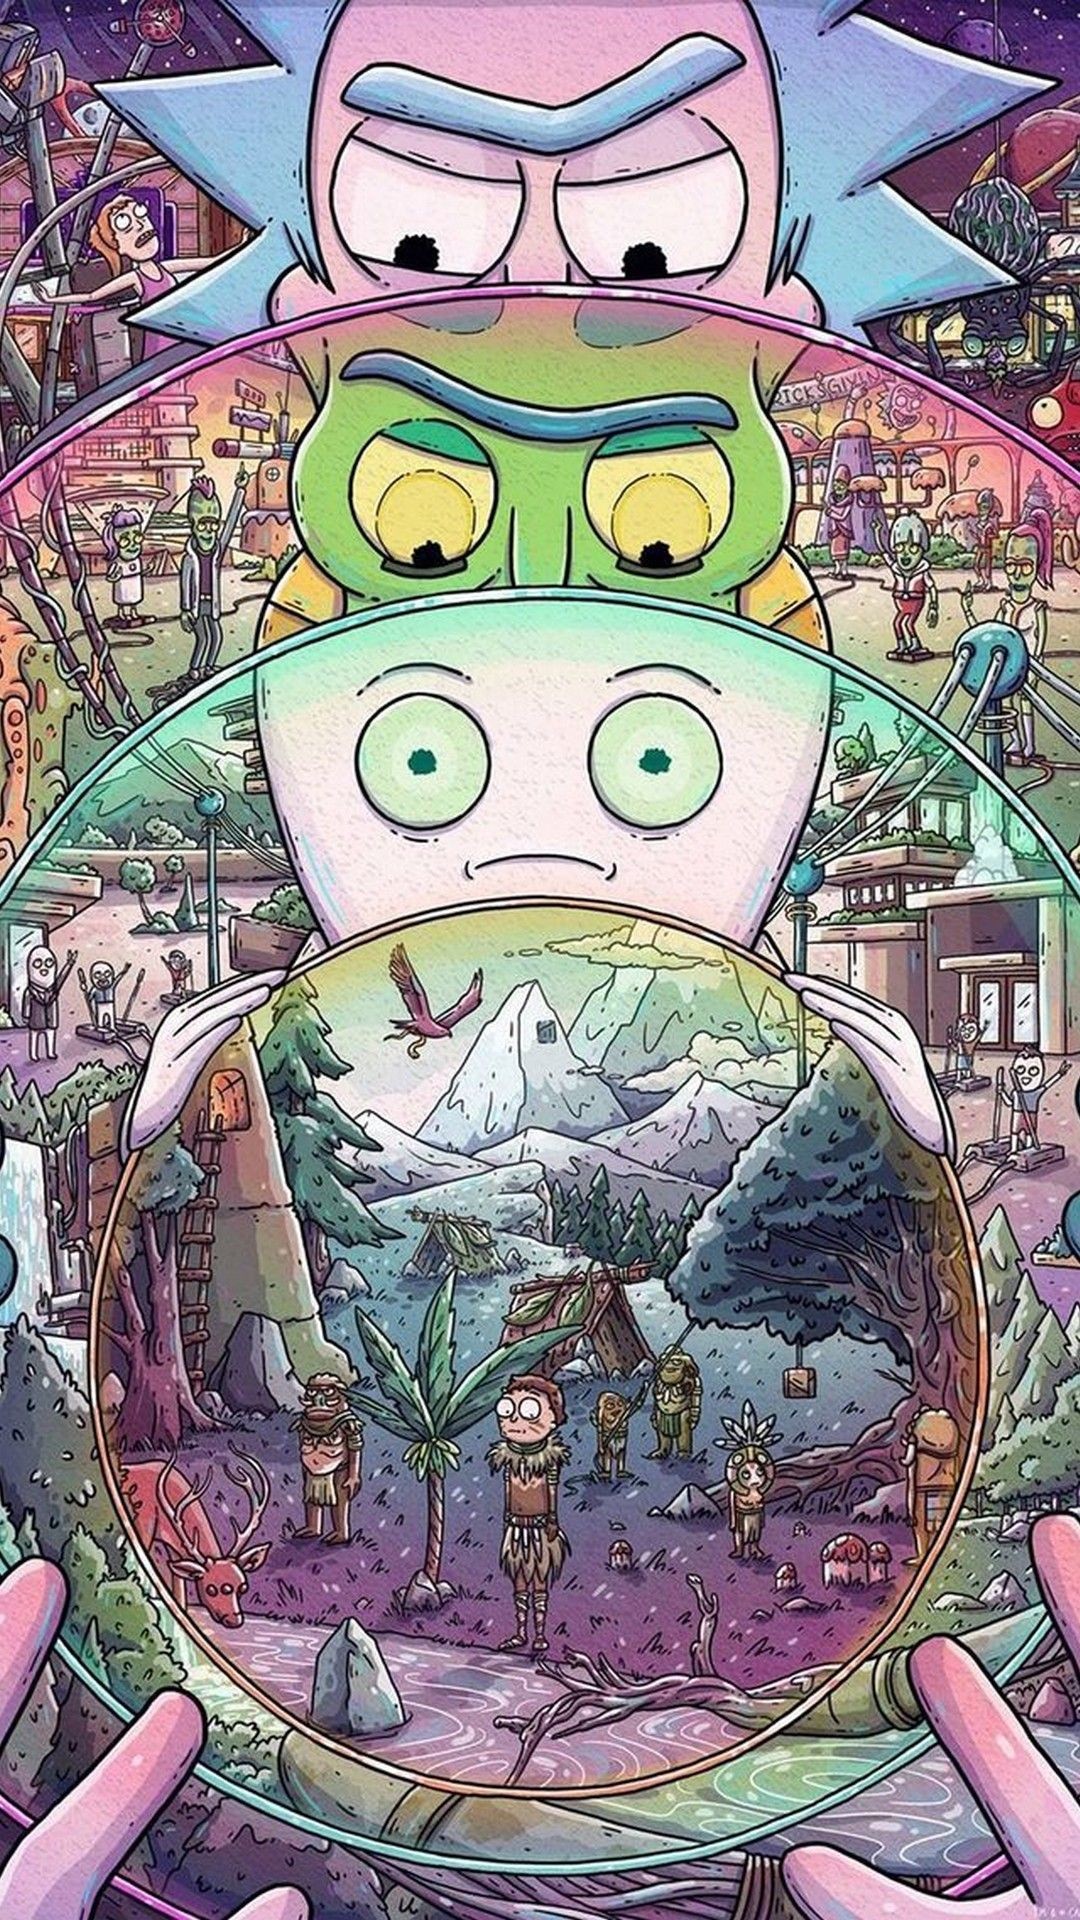 1080x1920 Rick and Morty iPhone X Wallpaper | Best HD Wallpapers